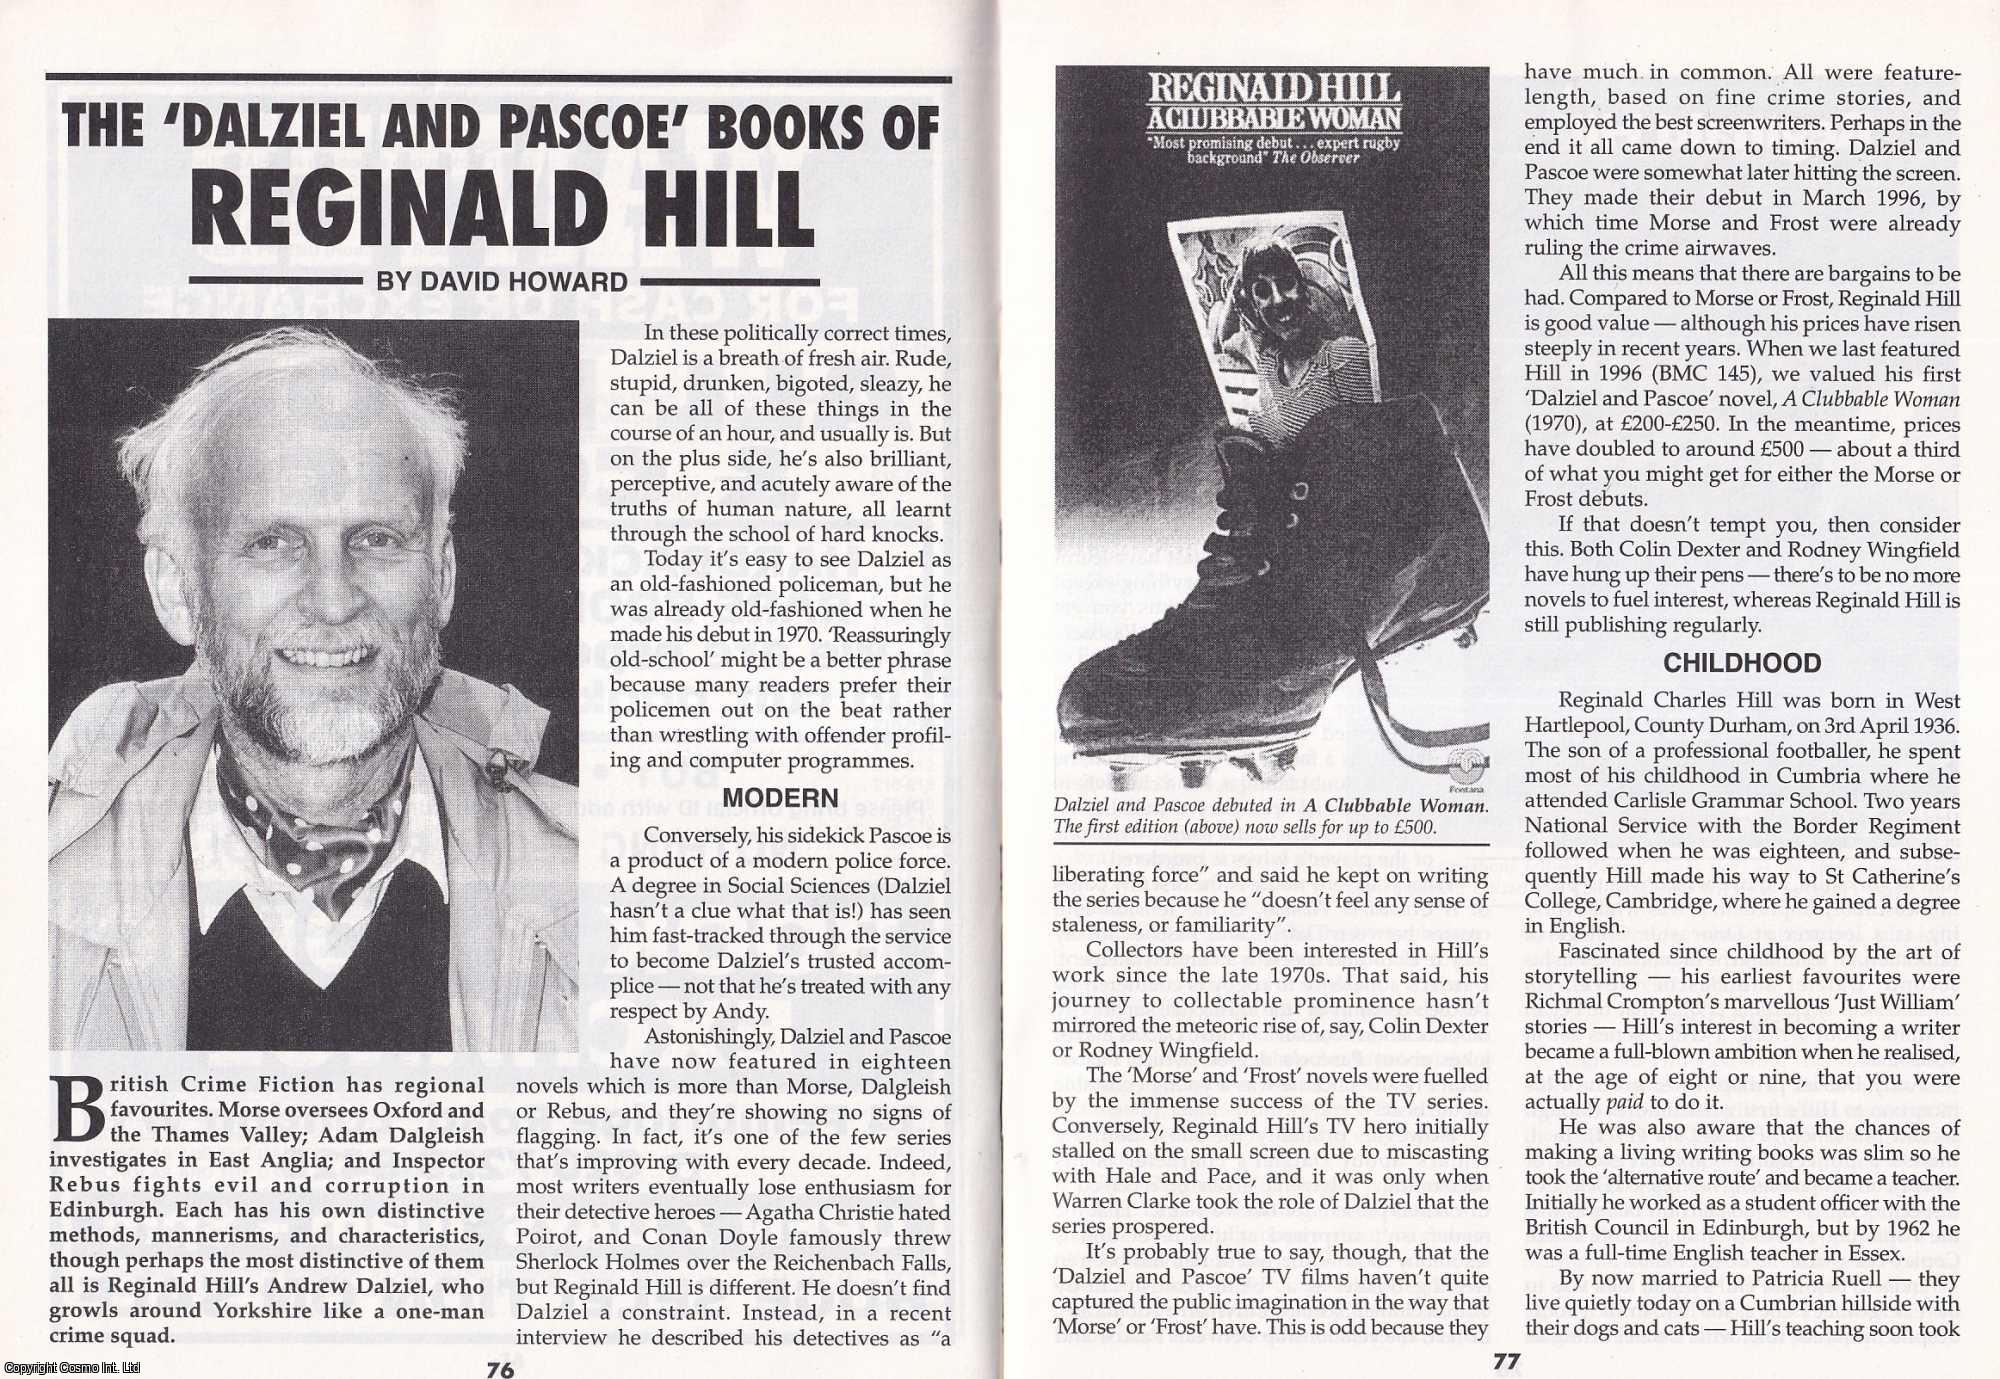 David Howard - The Dalziel and Pascoe Books of Reginald Hill. This is an original article separated from an issue of The Book & Magazine Collector publication.